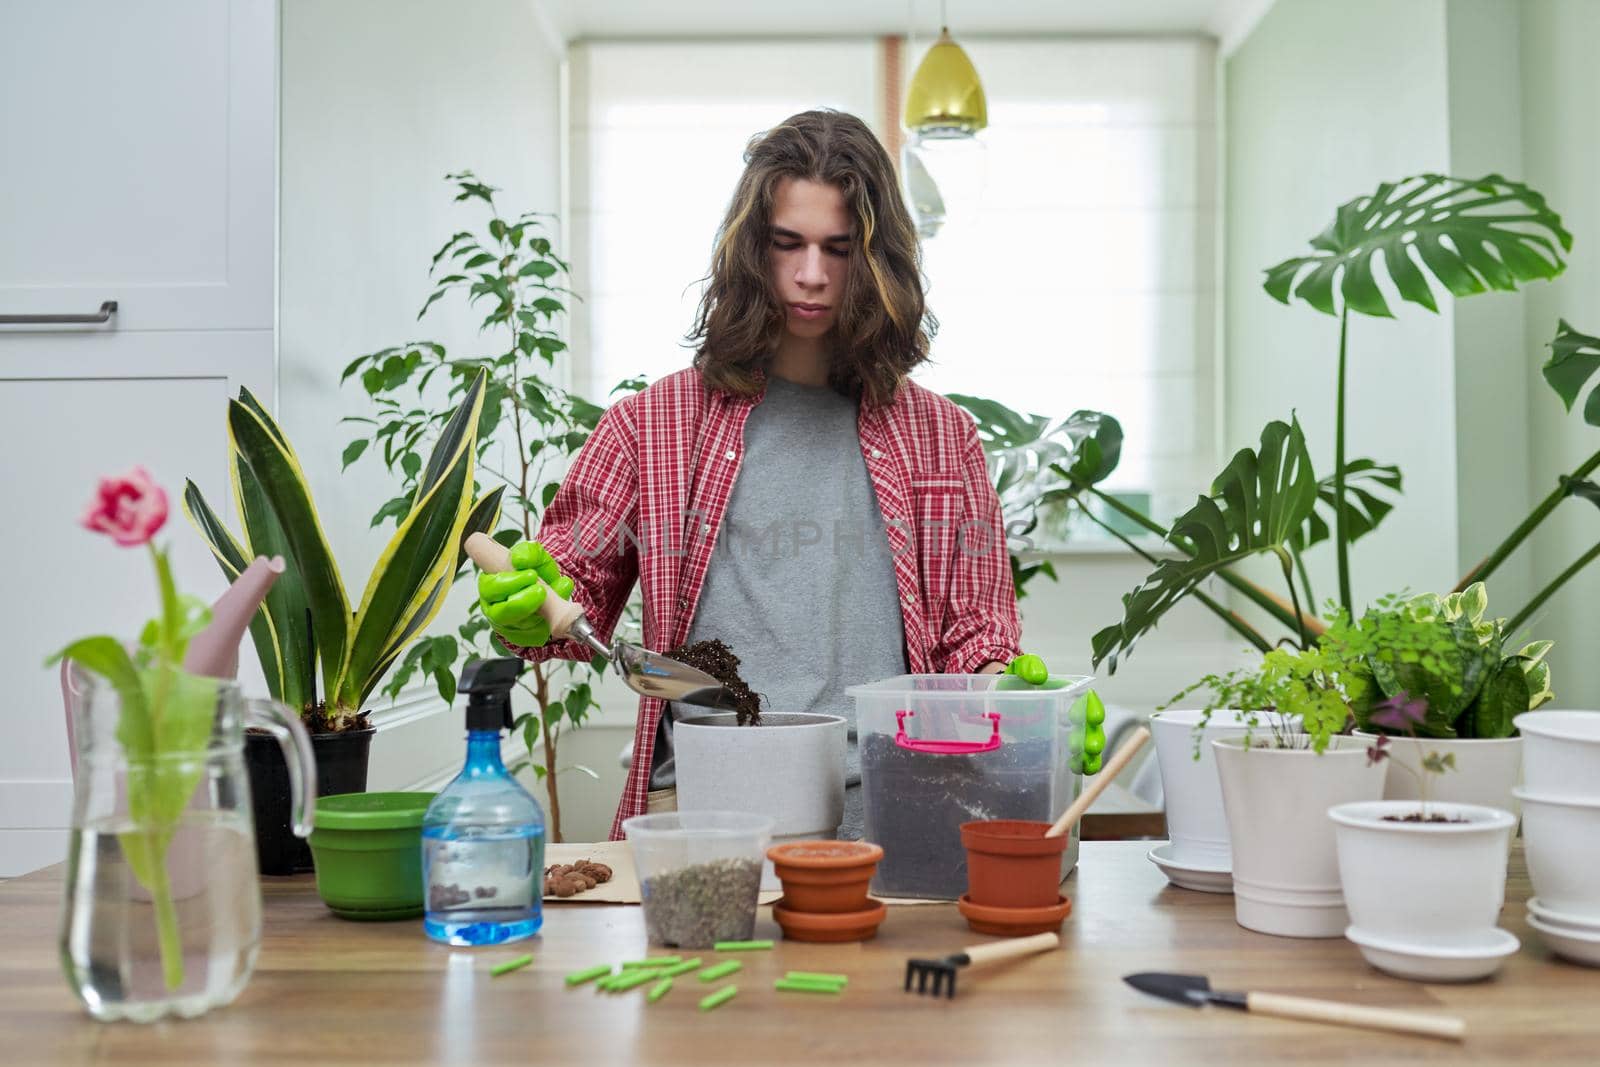 Guy teenager caring replanting indoor plants in pots. On the table are soil, pots, plants, fertilizers, watering can. Floristry hobby of young teen boy